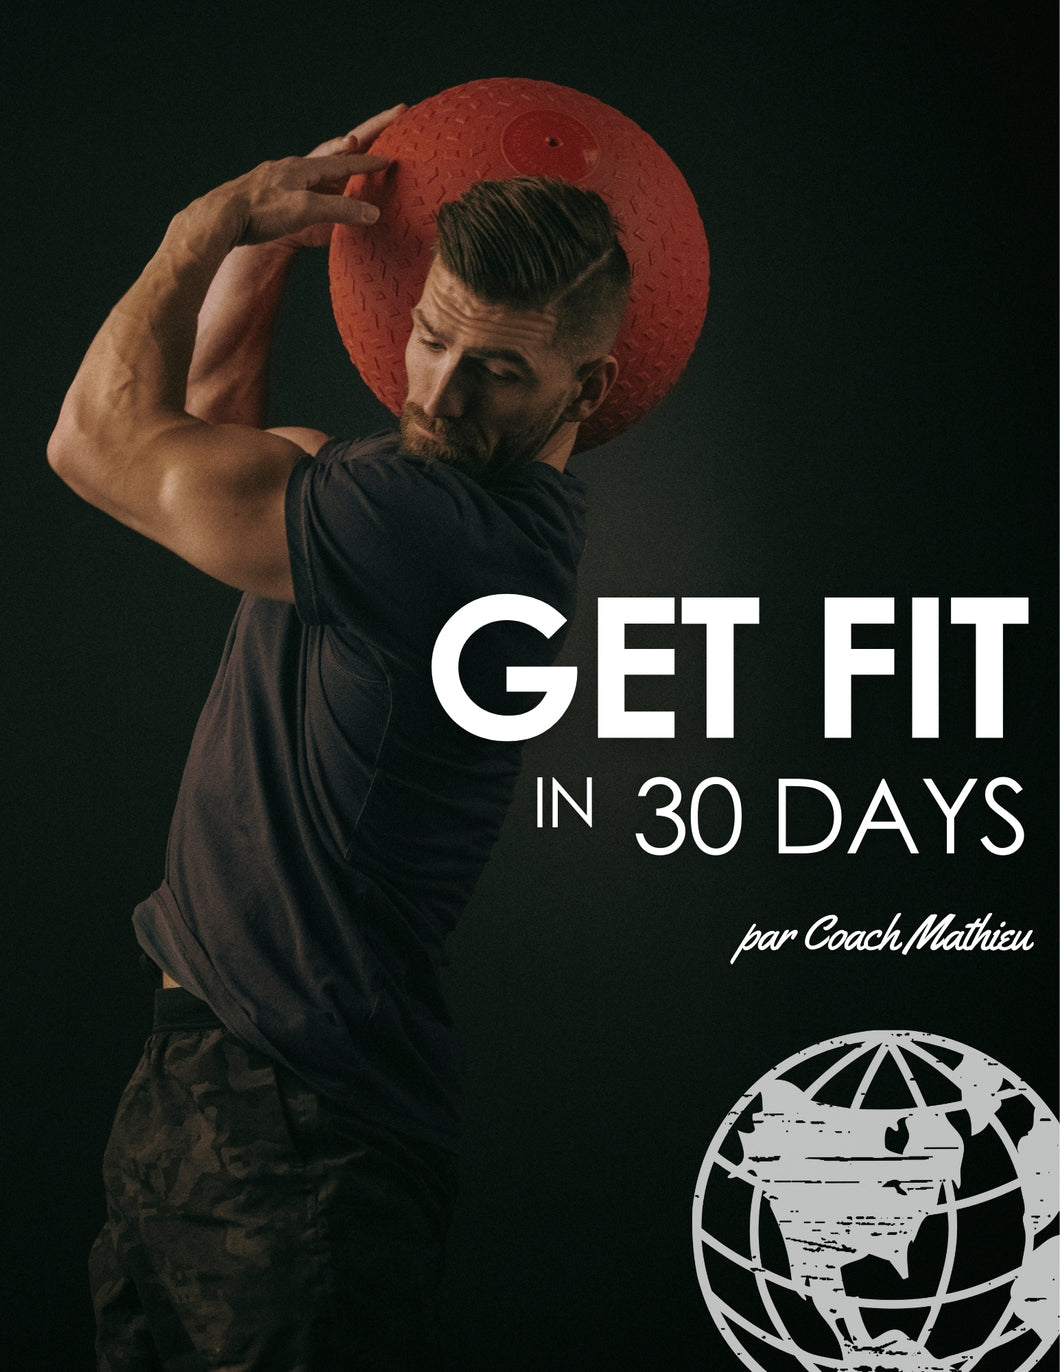 30 DAYS TO GET FIT